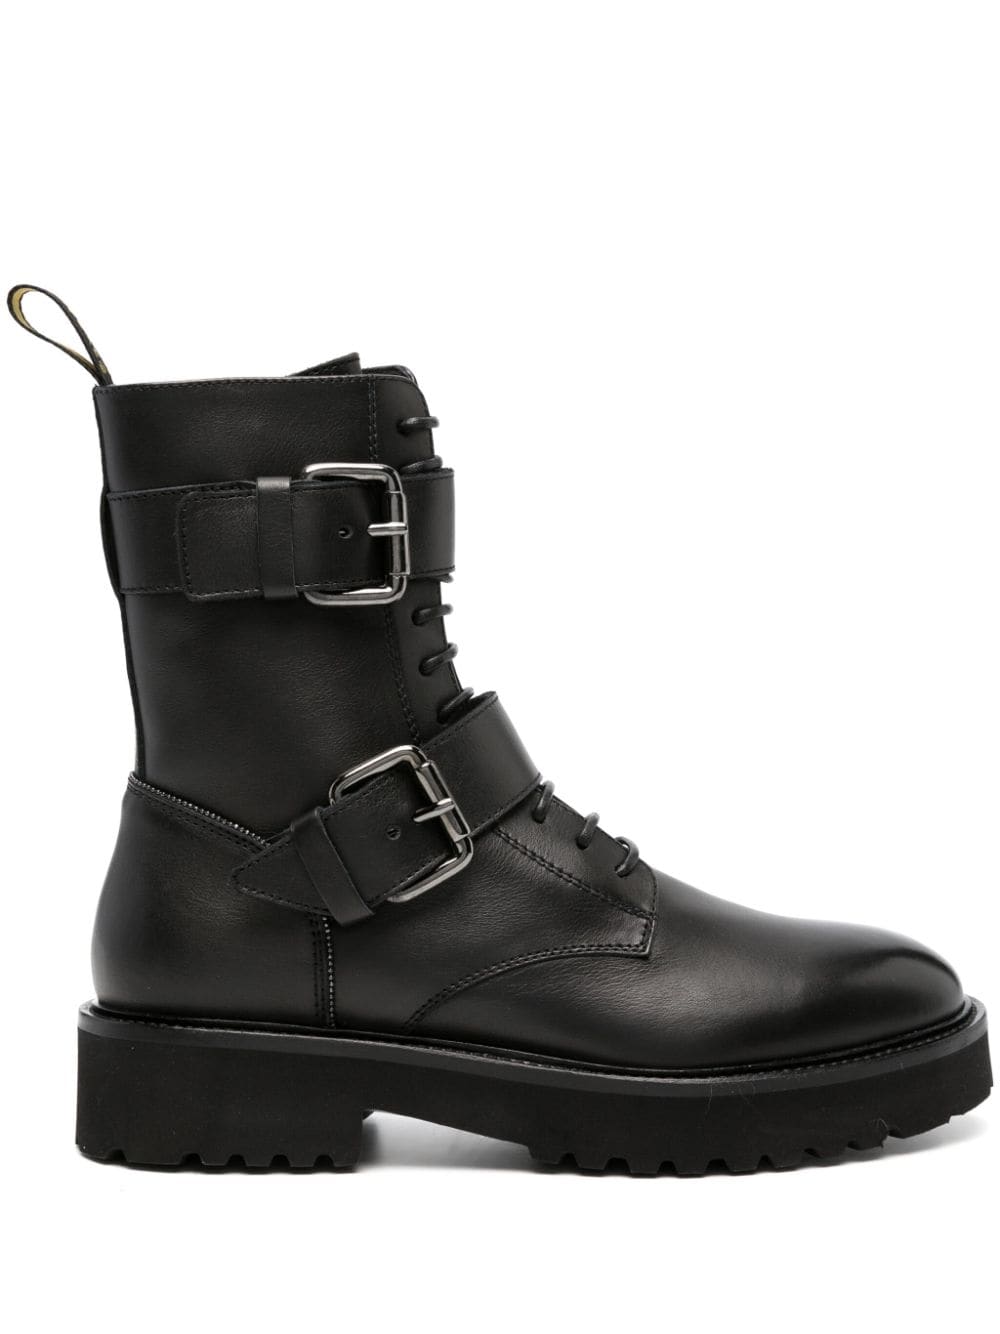 Doucal's buckled lace-up leather boots - Black von Doucal's